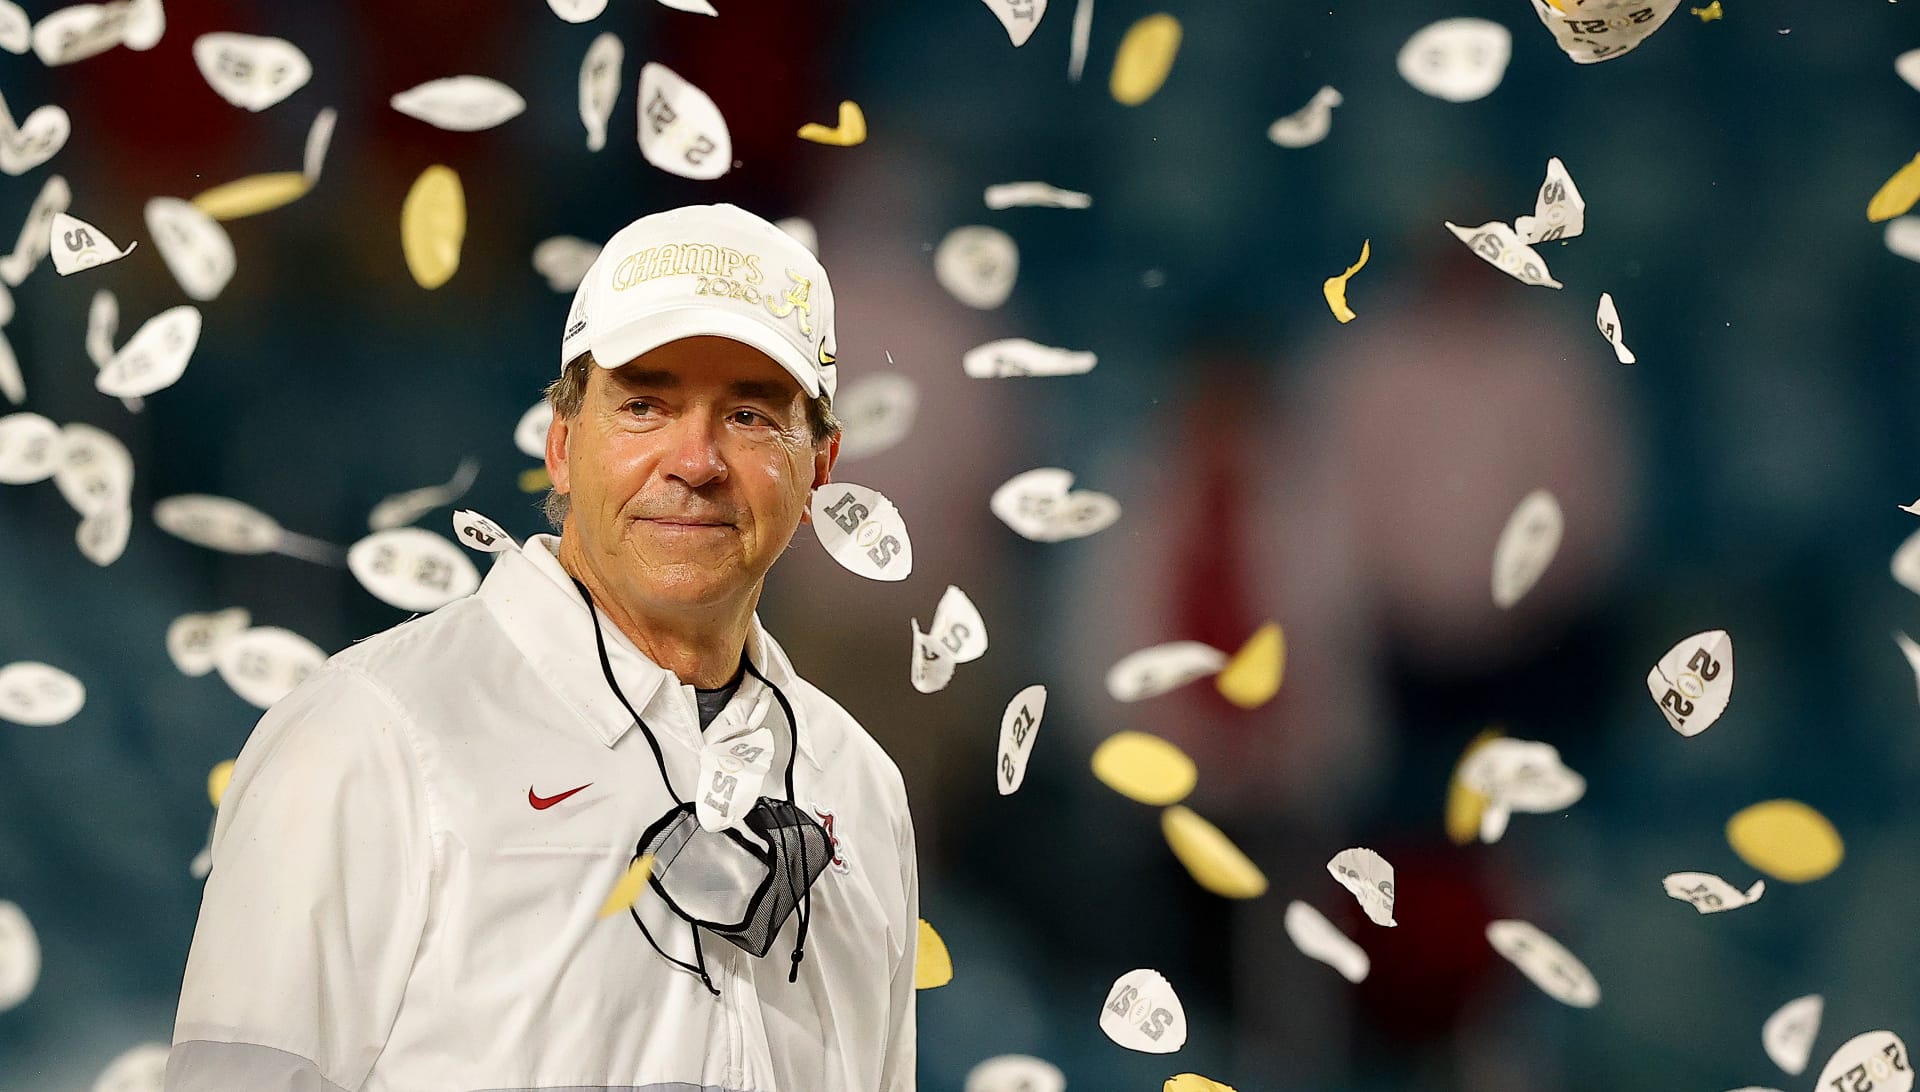 Head coach Nick Saban of the Alabama Crimson Tide looks on following the College Football Playoff National Championship game win over the Ohio State Buckeyes at Hard Rock Stadium on January 11, 2021 in Miami Gardens, Florida. (Photo by Kevin C. Cox/Getty Images)